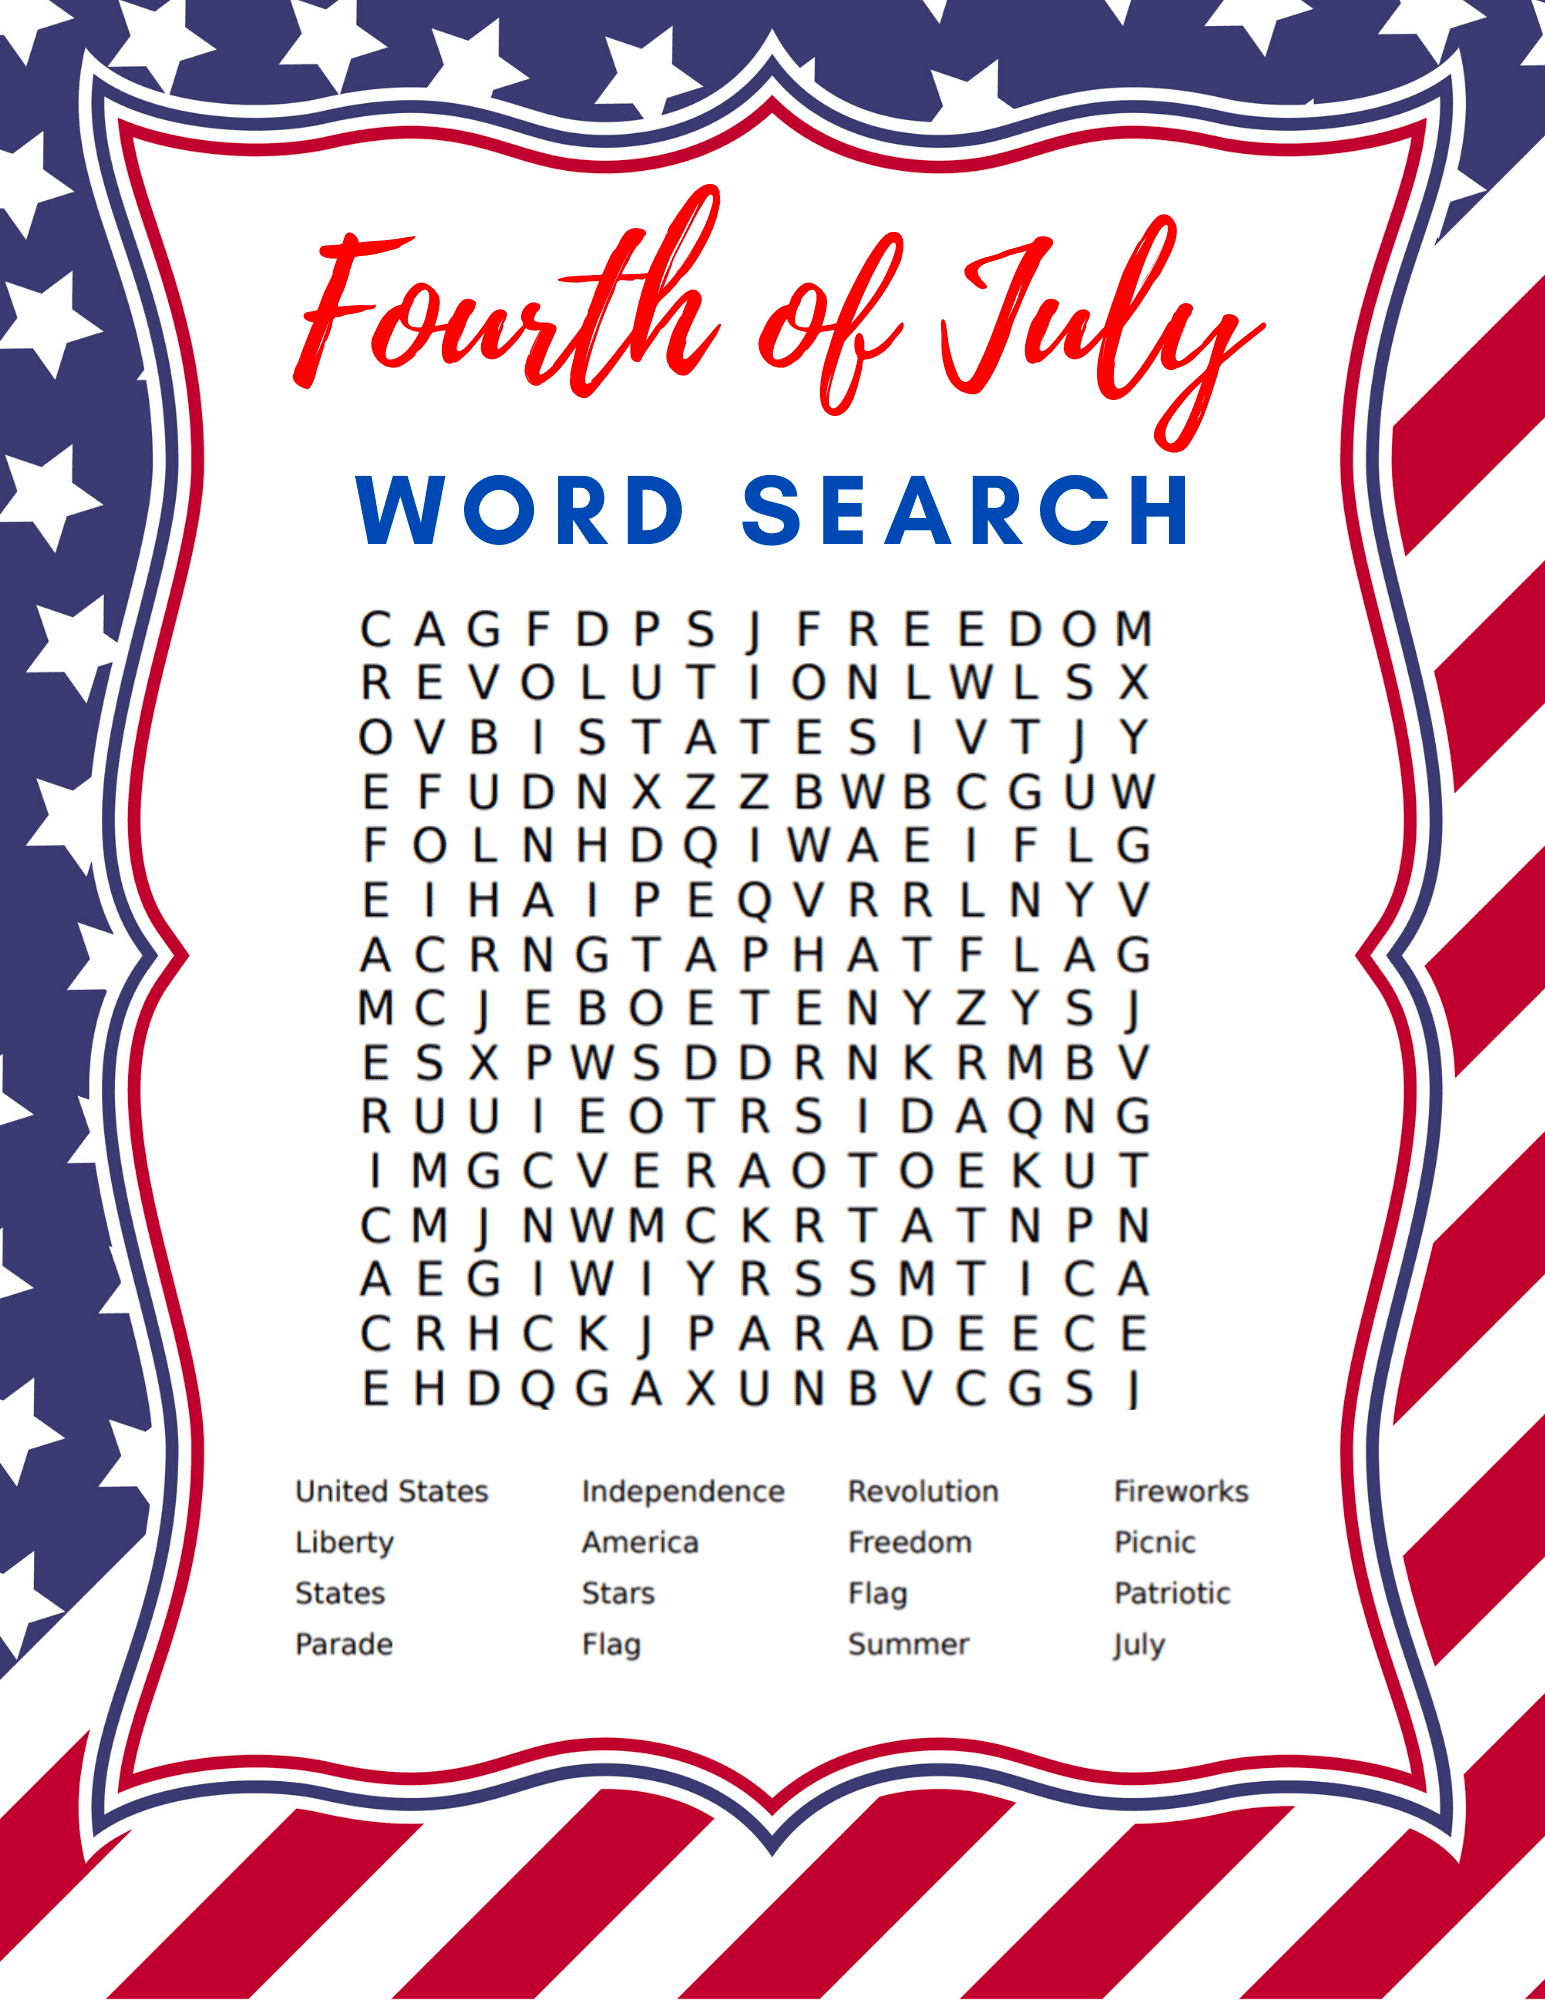  A printable image of a Fourth of July Word Search